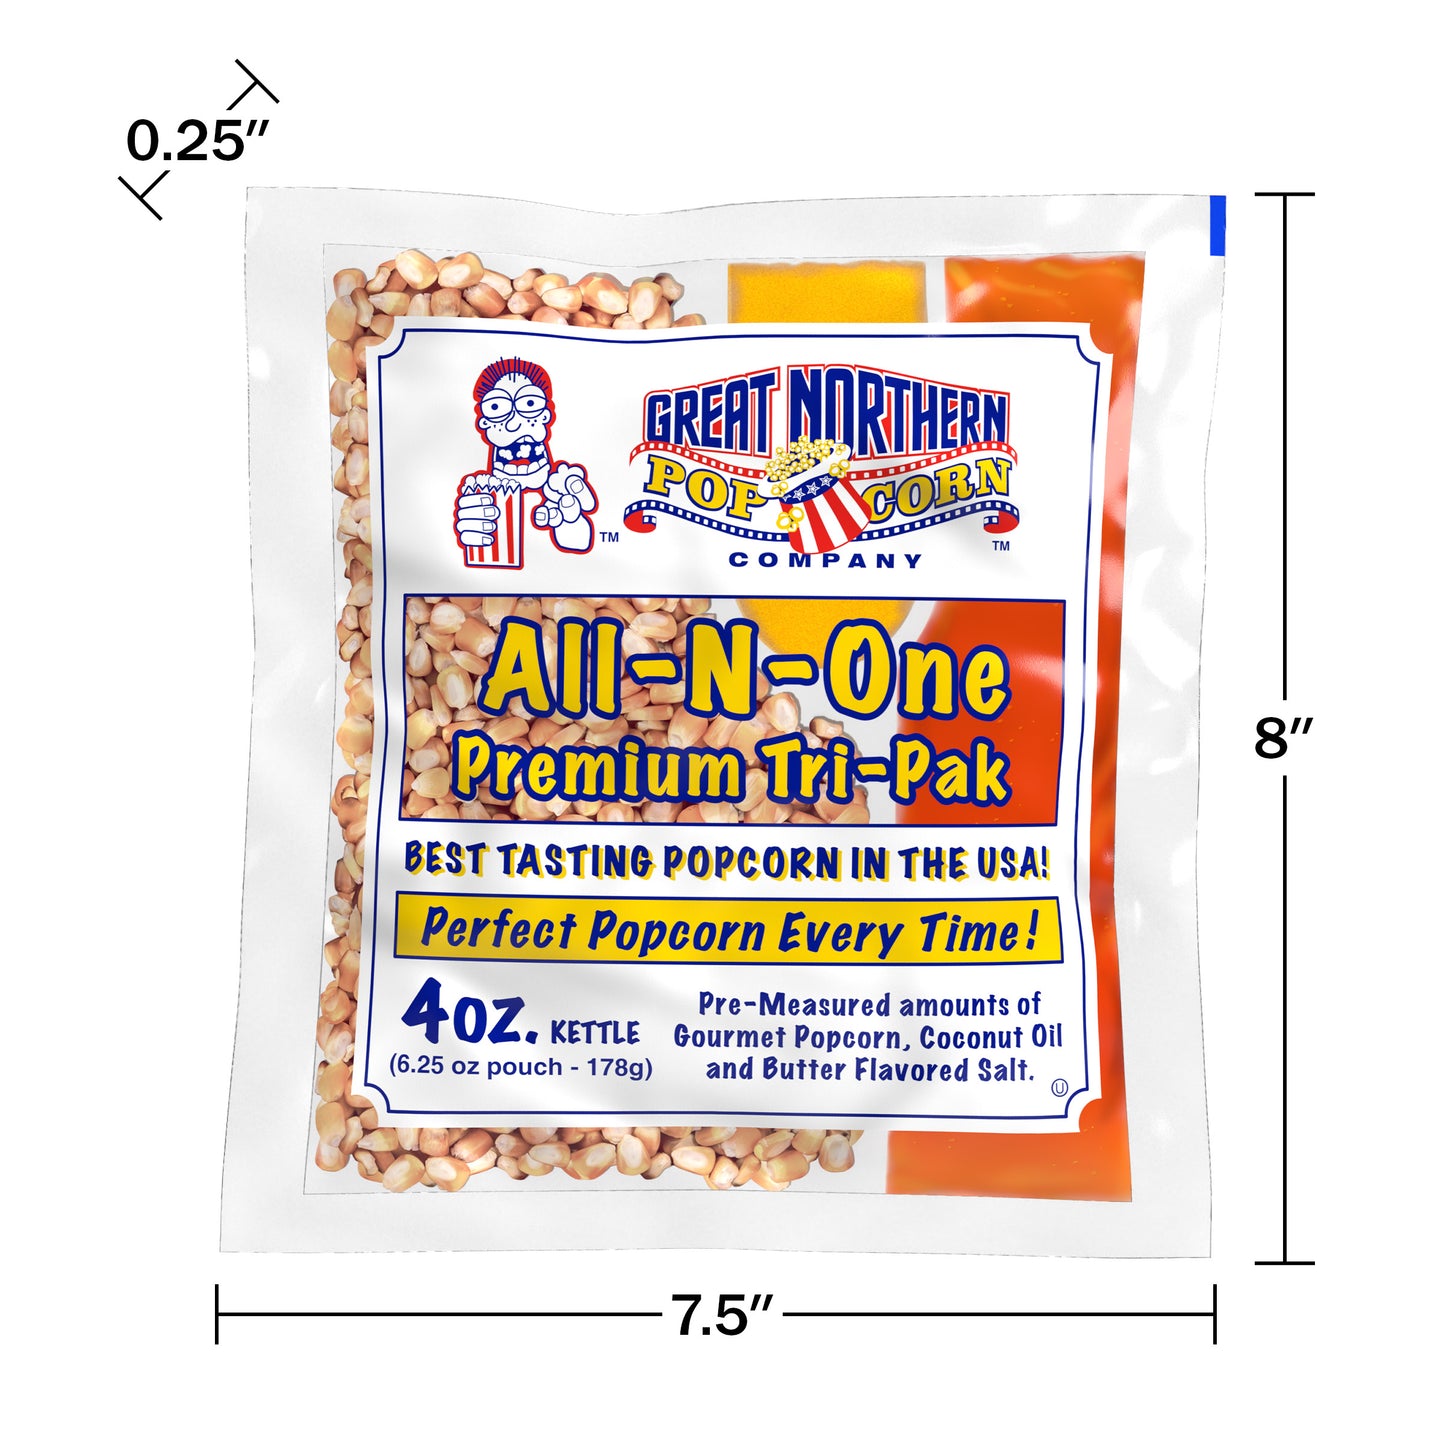 4 Ounce Popcorn, Salt and Oil All-in-One Packets - Case of 12